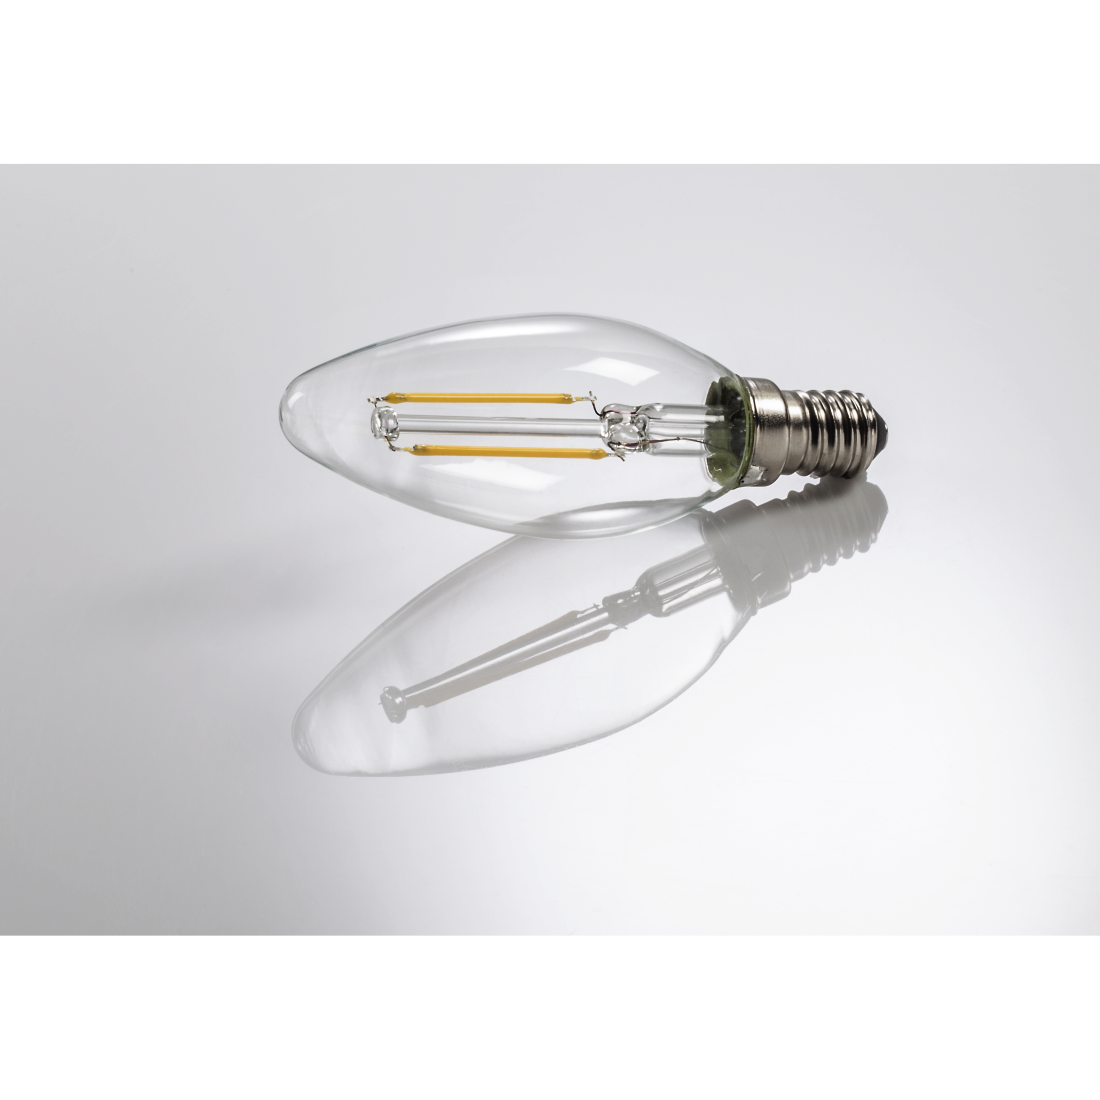 abx3 High-Res Image 3 - Xavax, LED Filament, E14, 250lm replaces 25W, candle bulb, warm white